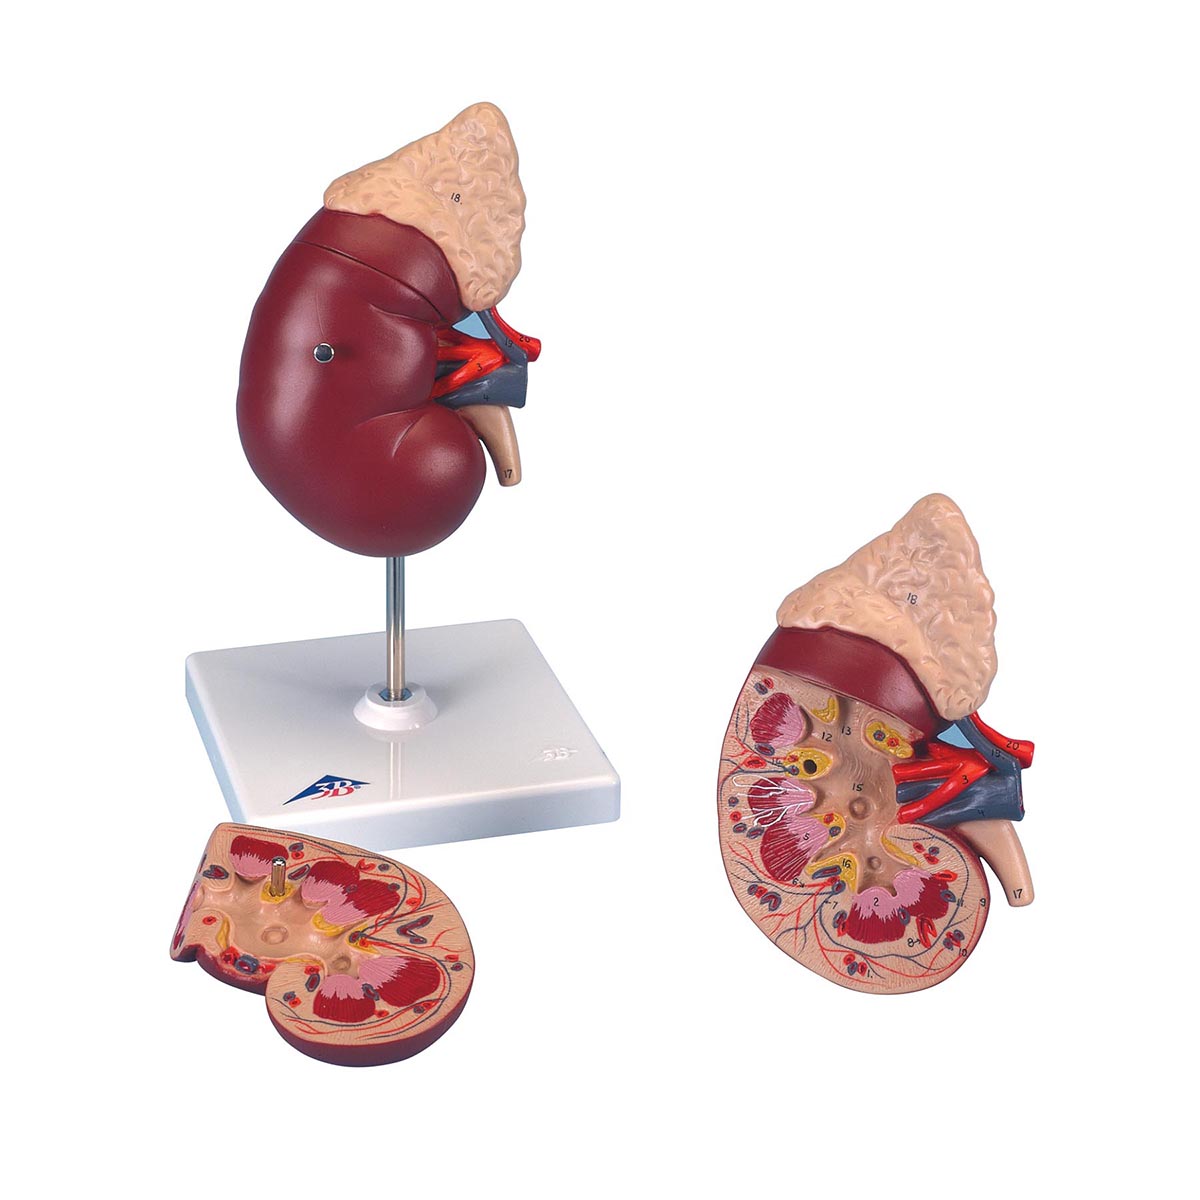 KIDNEY WITH ADRENAL GLAND, 2 PART